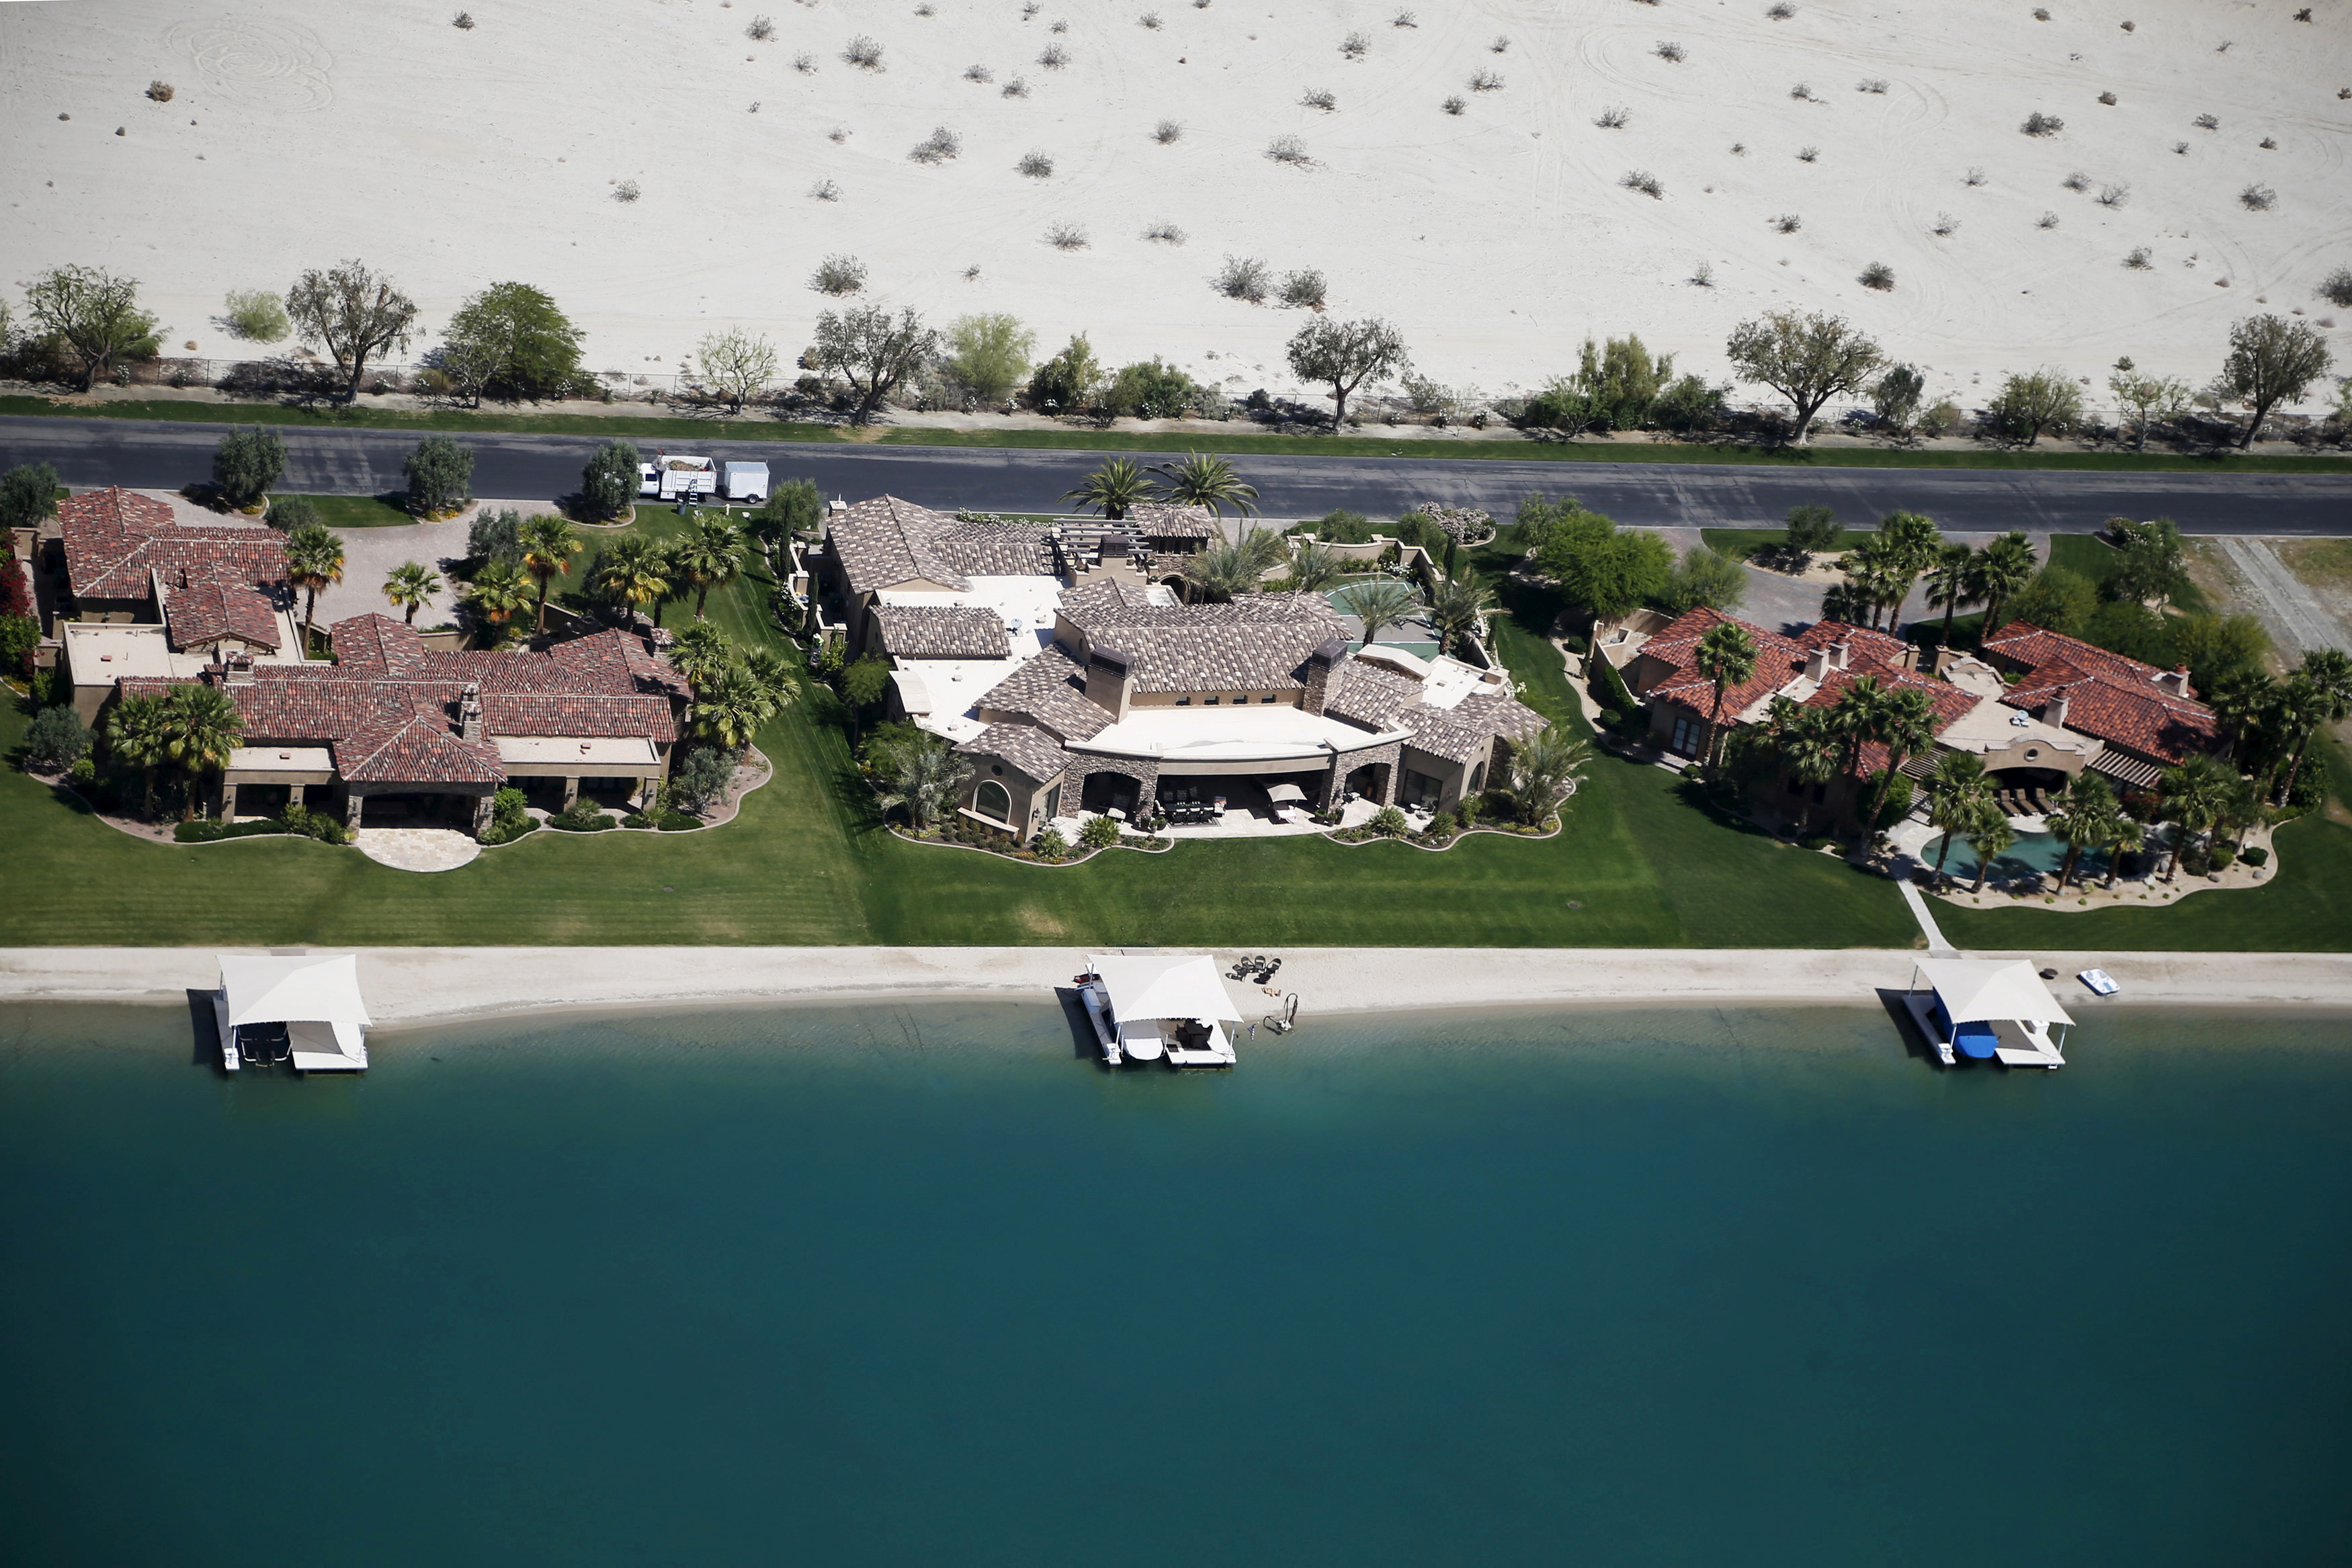 Homes with boathouses built around an artificial lake are seen in Indio